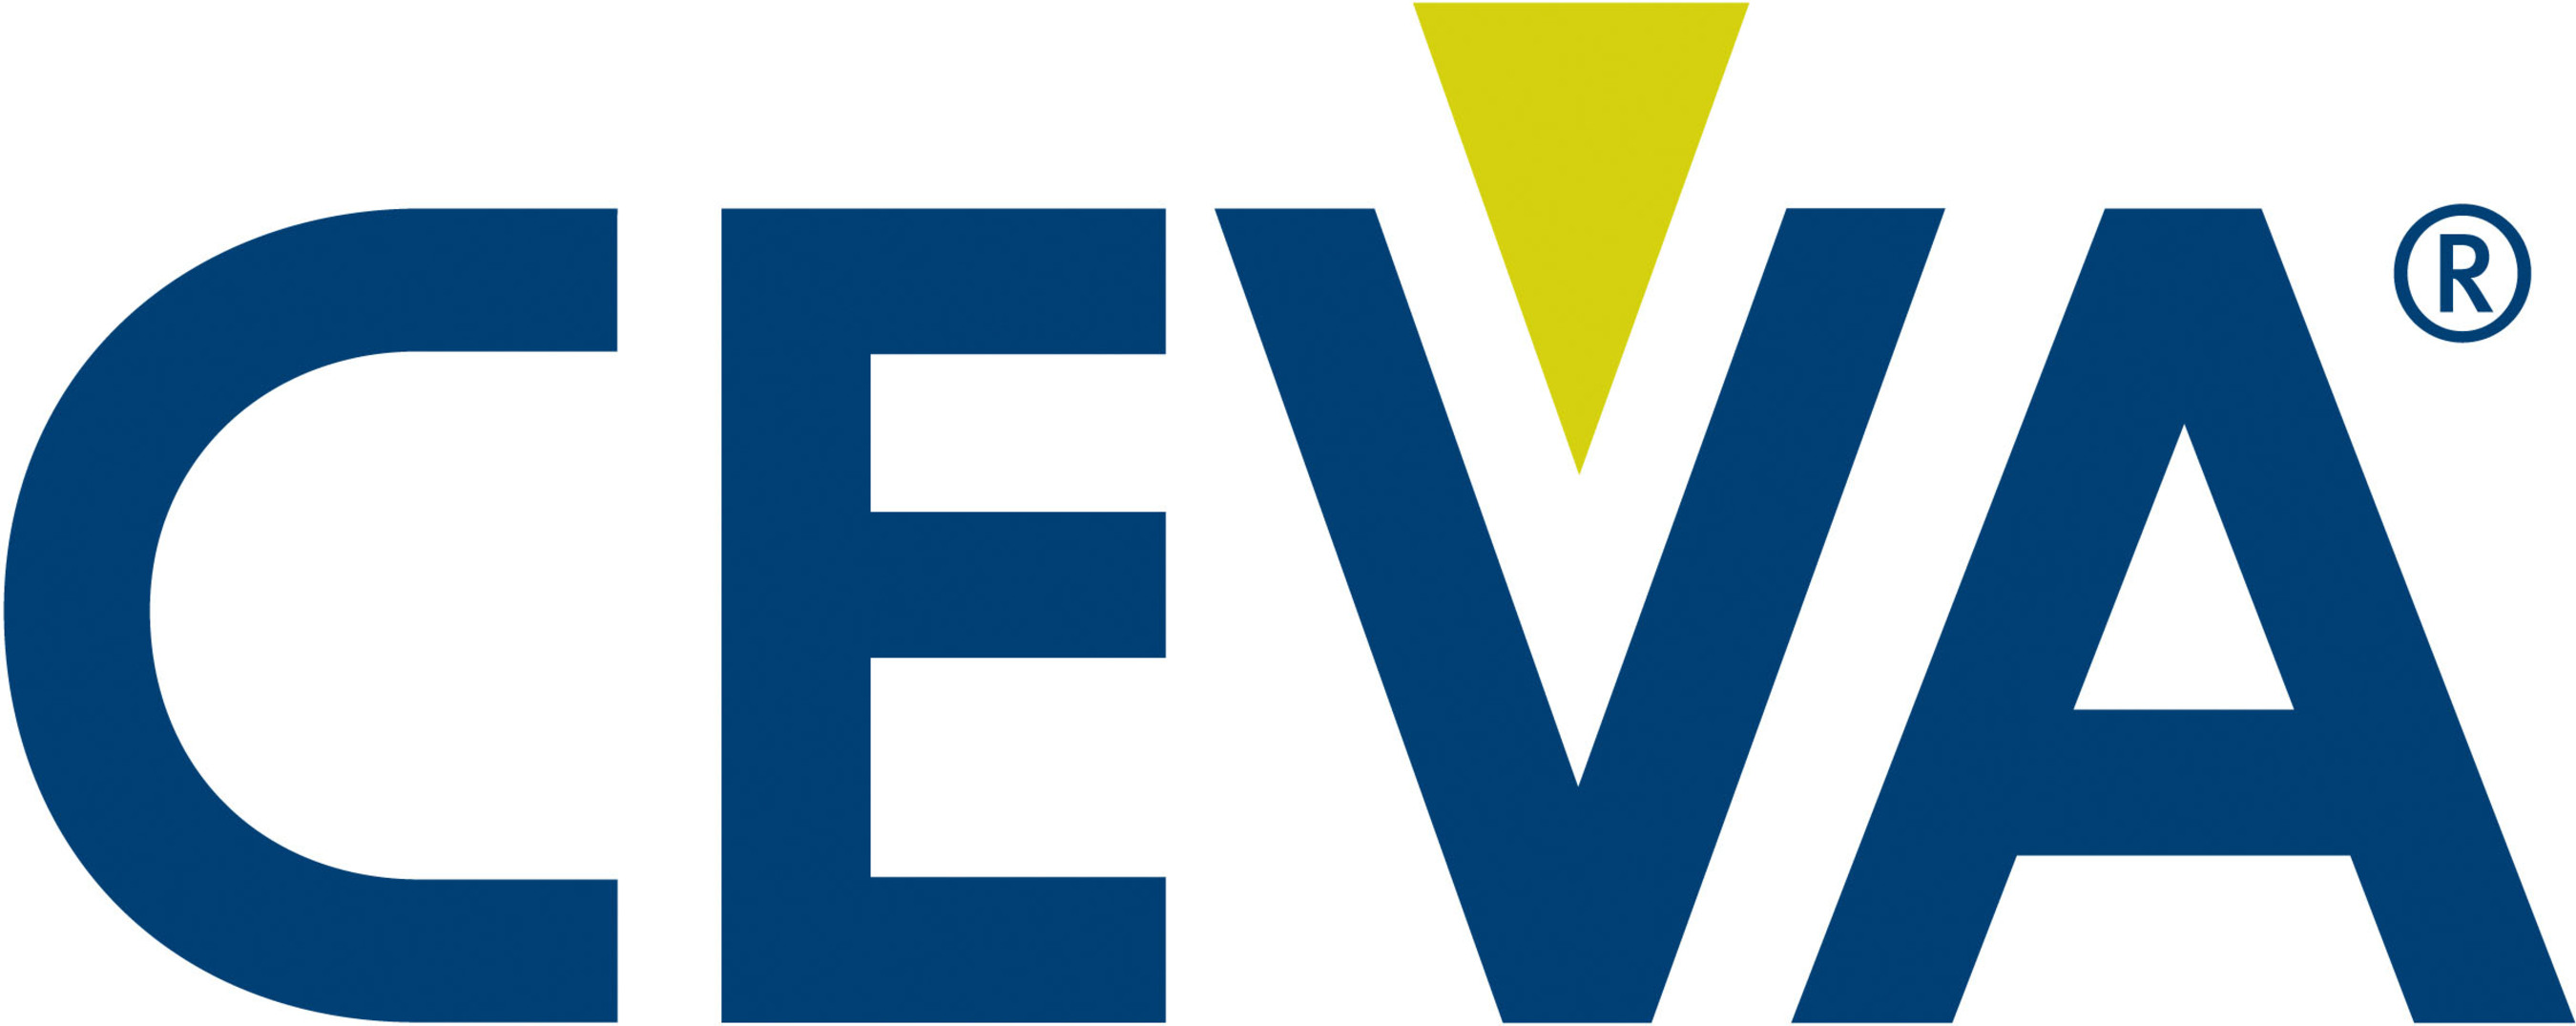 CEVA Announces Silicon-based Platform to Streamline Development of  Low-Power 'Smart and Connected' Devices